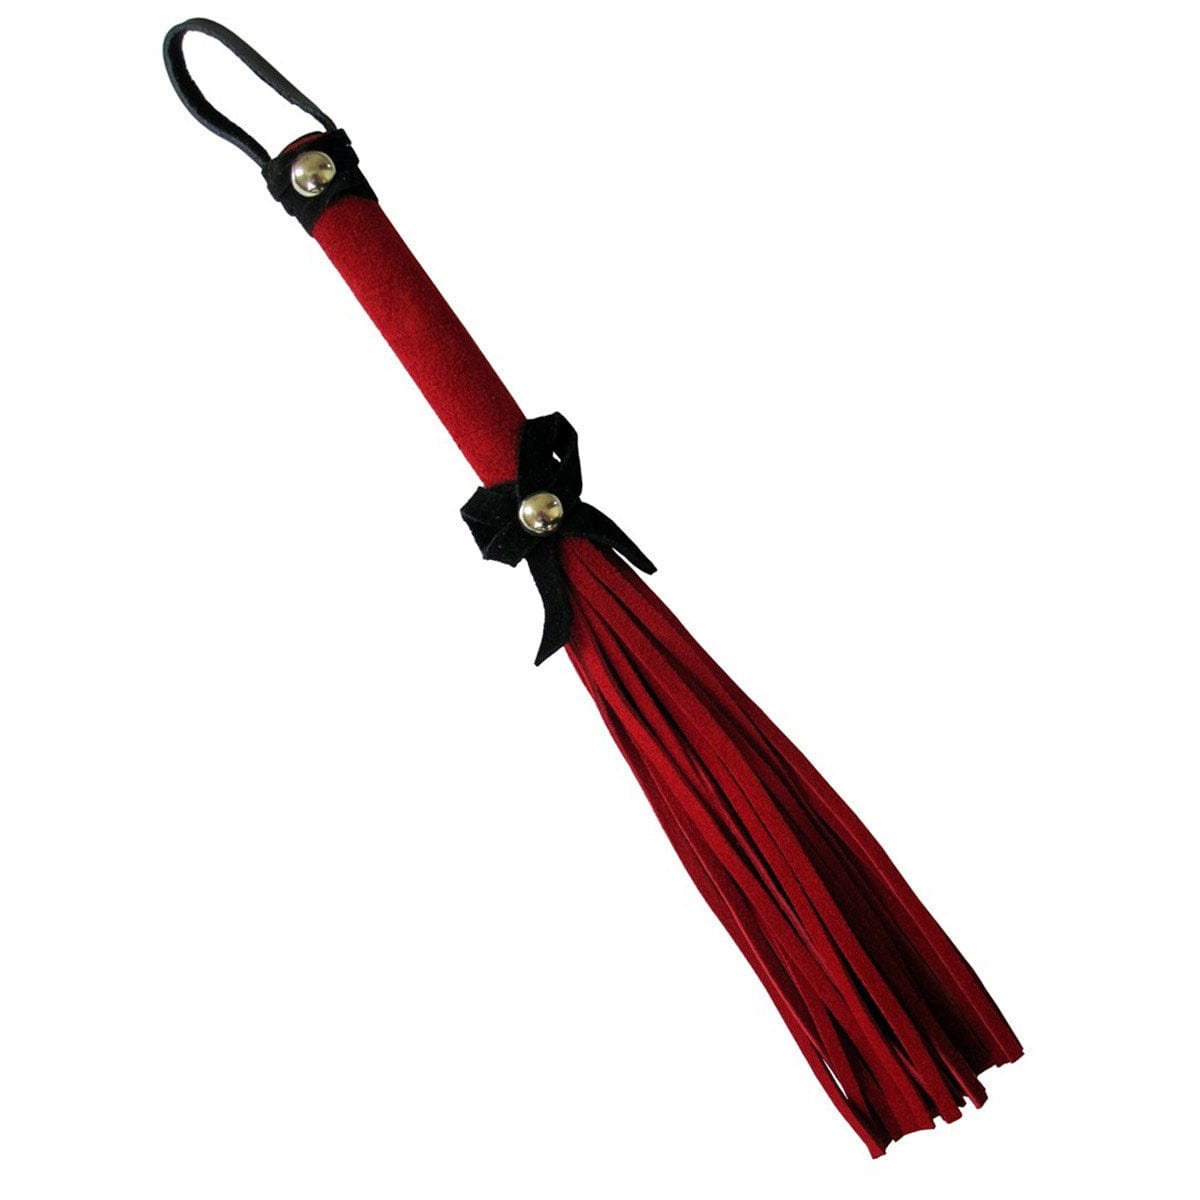 Ruff Doggie Styles Love Knot Mini Flogger with Bow Red Black- Rolik®